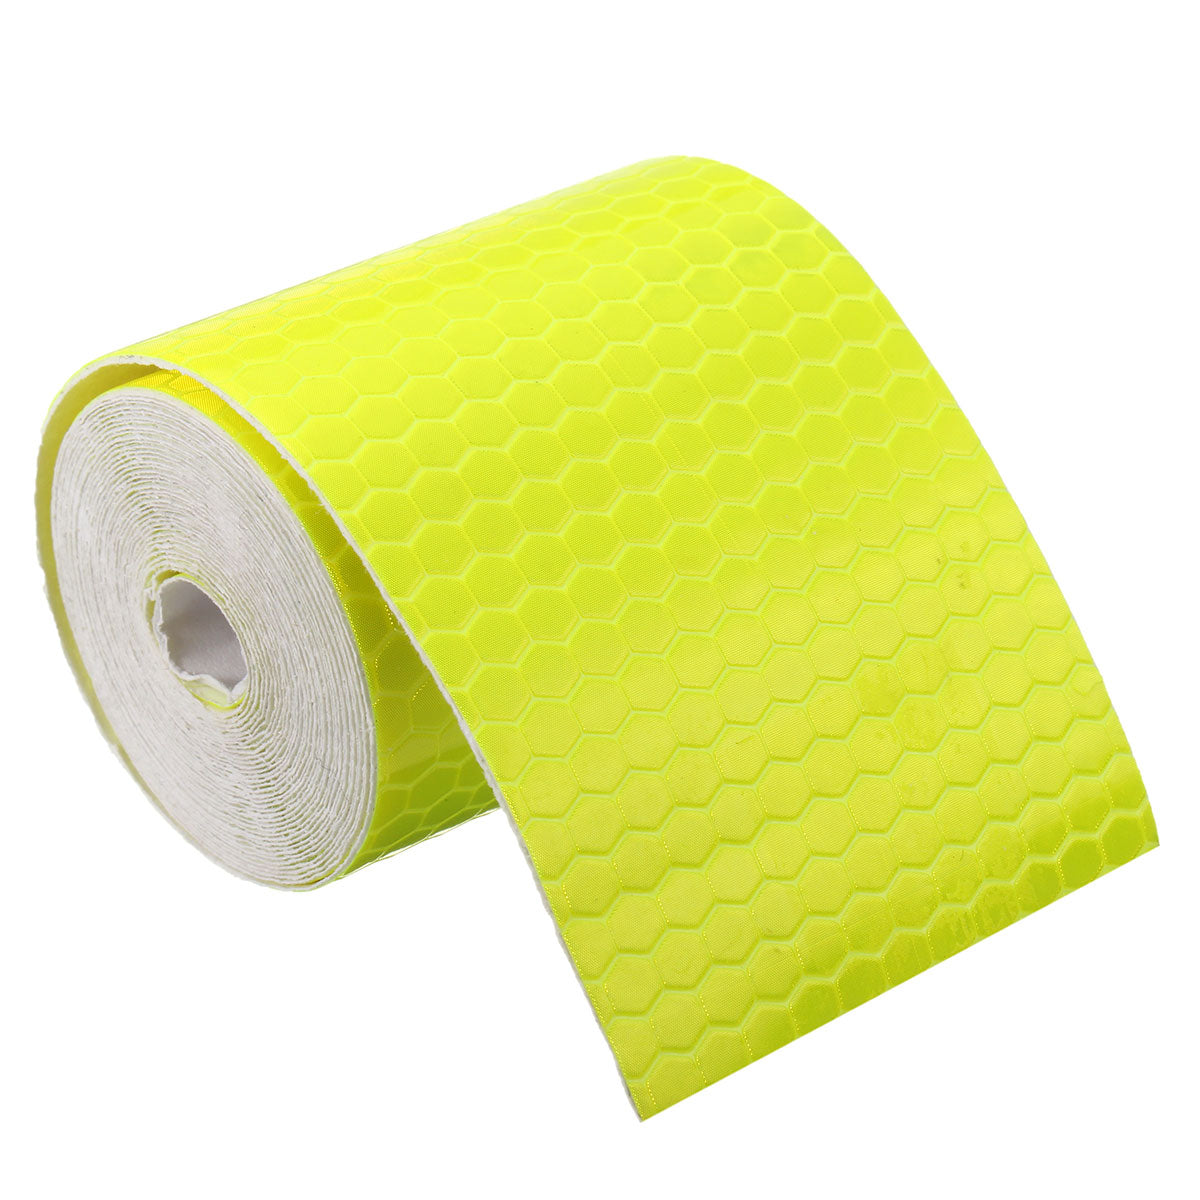 Green Yellow 5cm X 300cm Reflective Safety Warning Conspicuity Tape Film Car Sticker